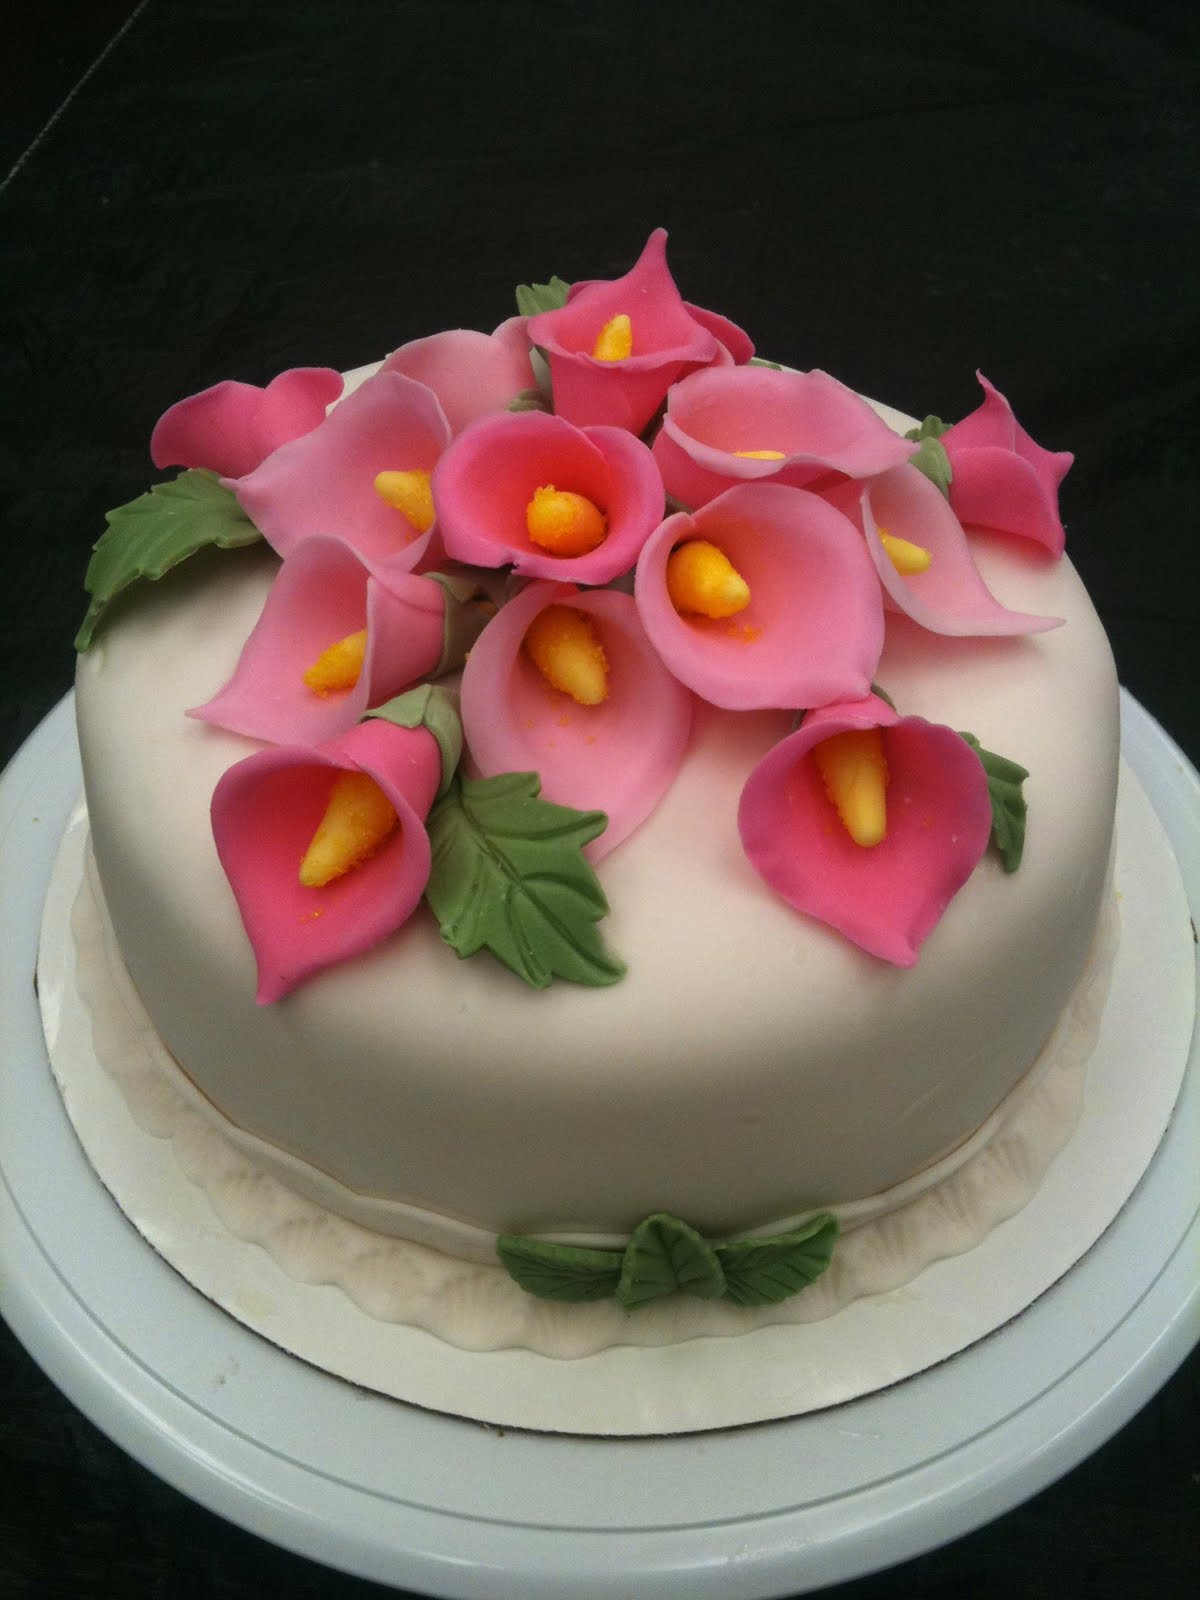 Cake Decorating by Sonia: January 2011 - Gum Paste ...